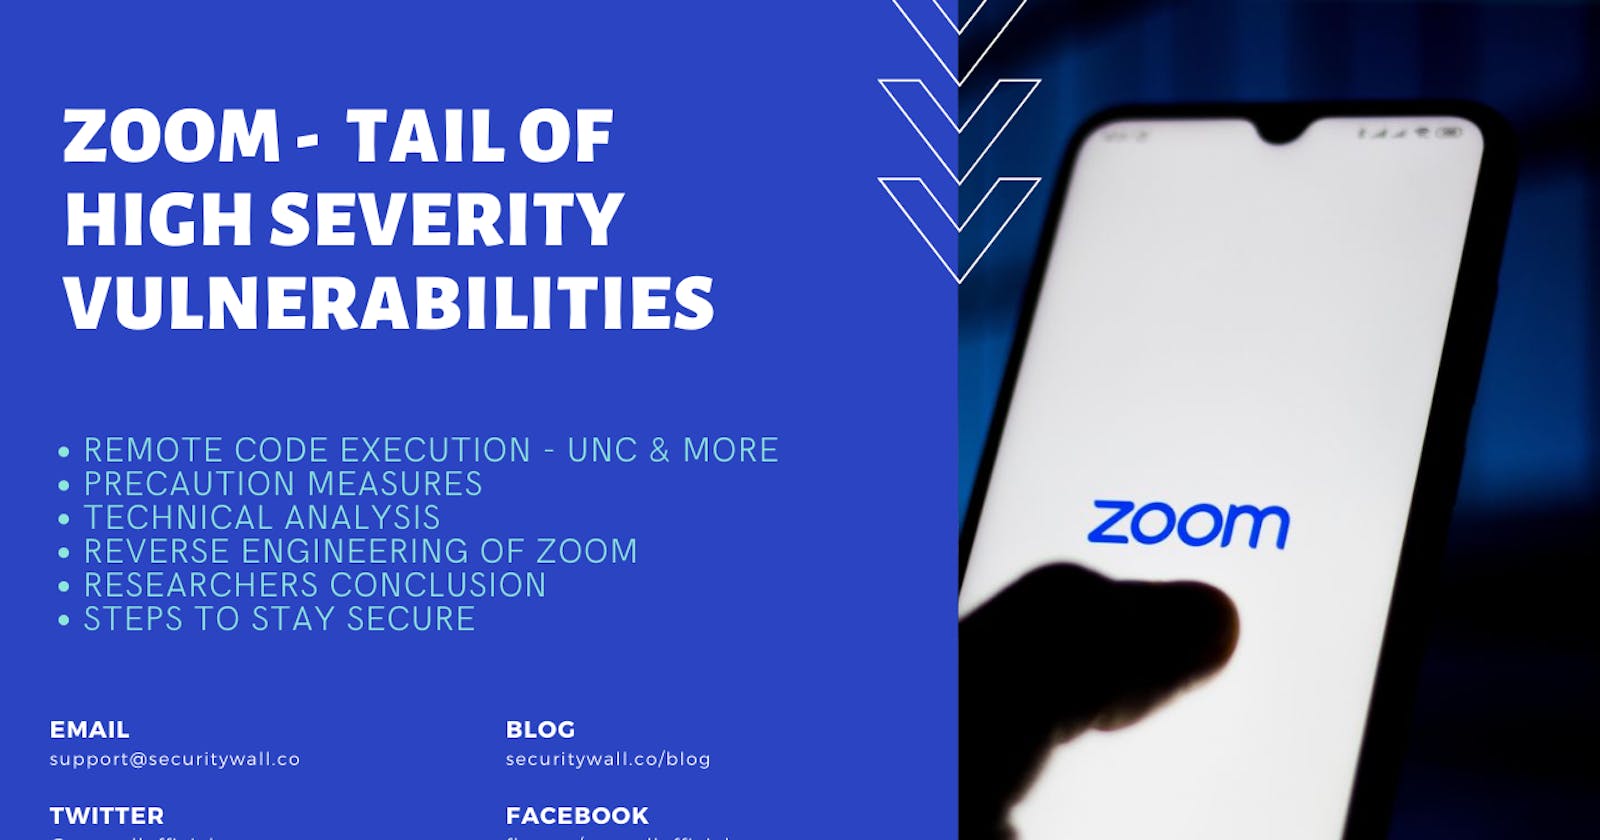 Zoom - Tail of High Severity Vulnerabilities